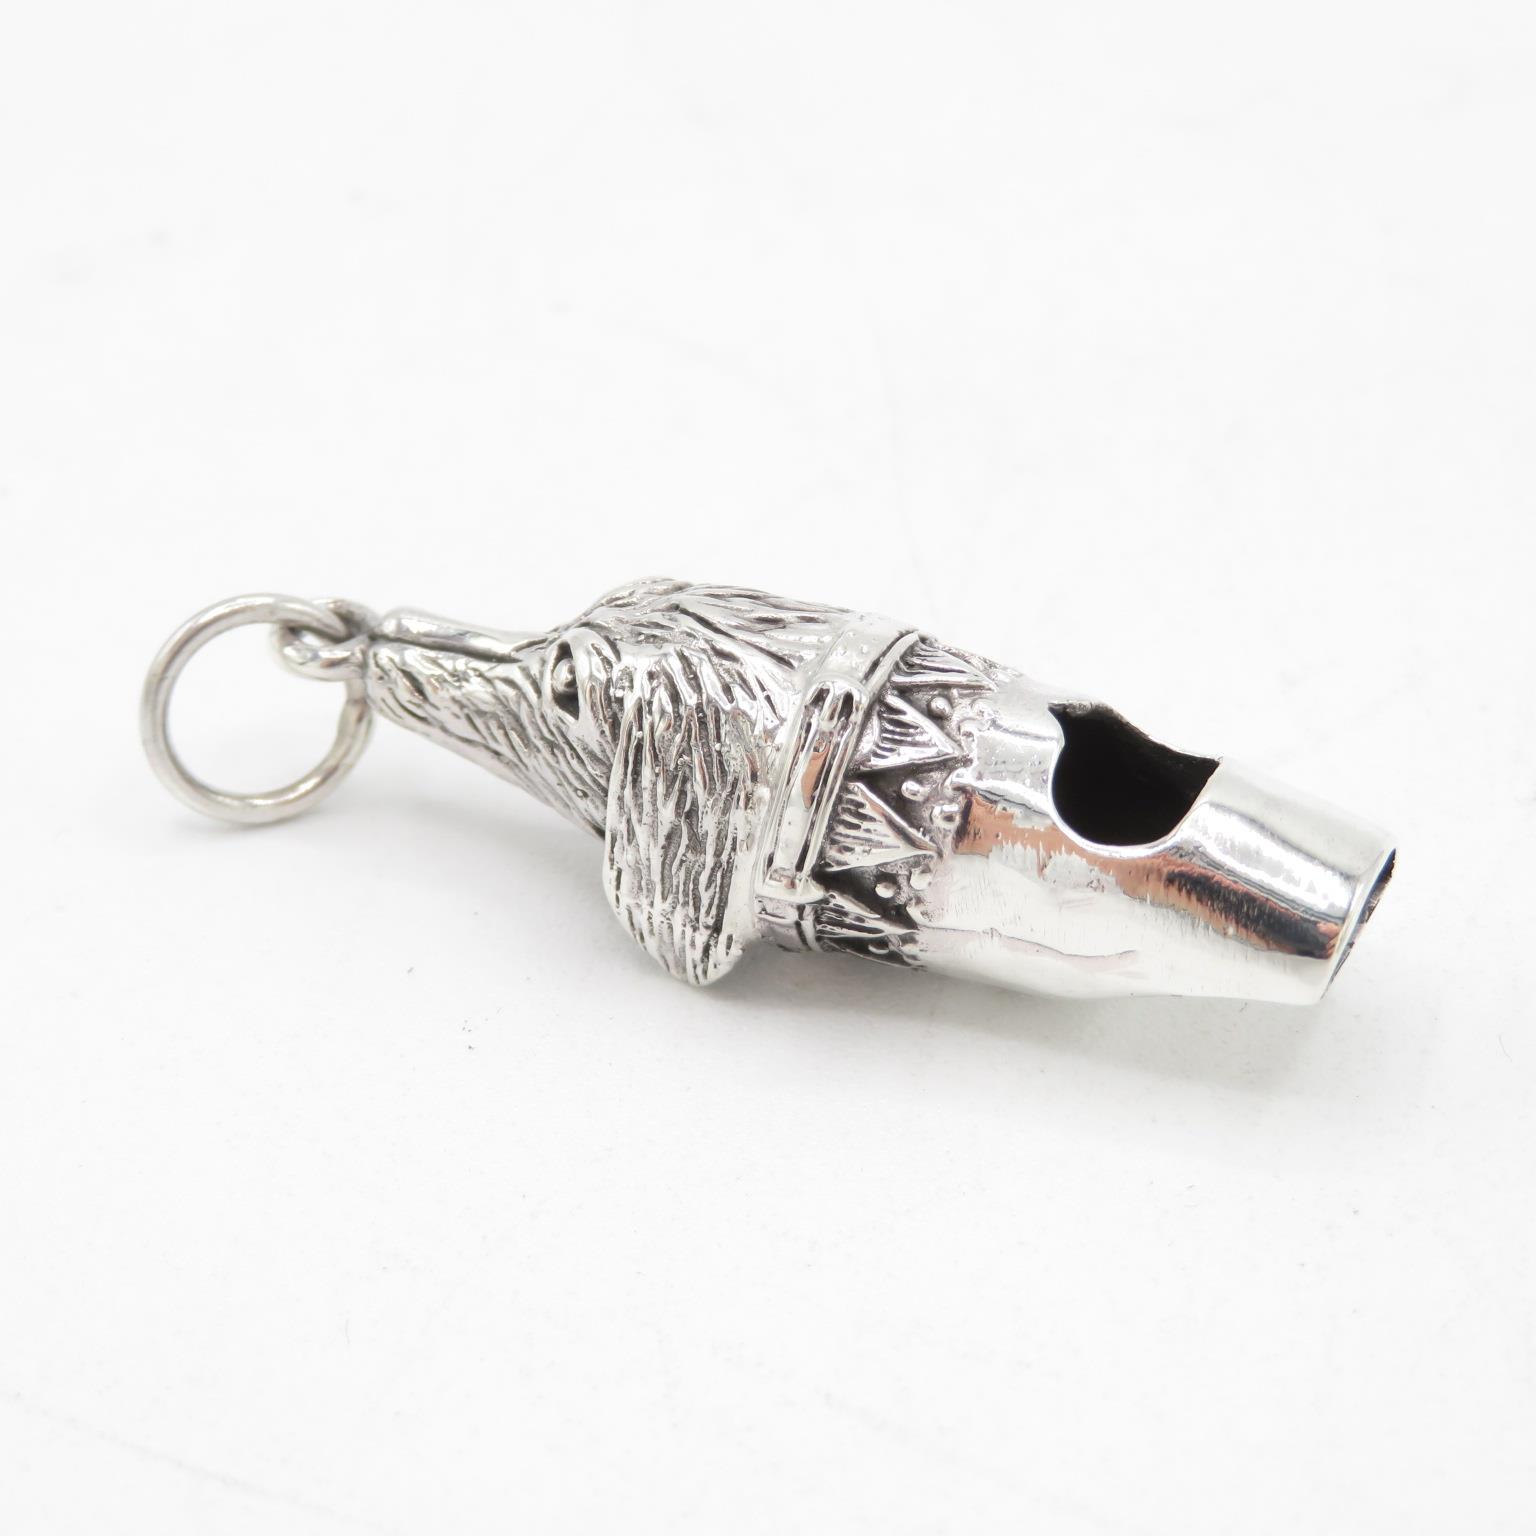 HM 925 Sterling Silver dog whistle with fob ring and detailed dog head design fully working (11. - Image 3 of 5